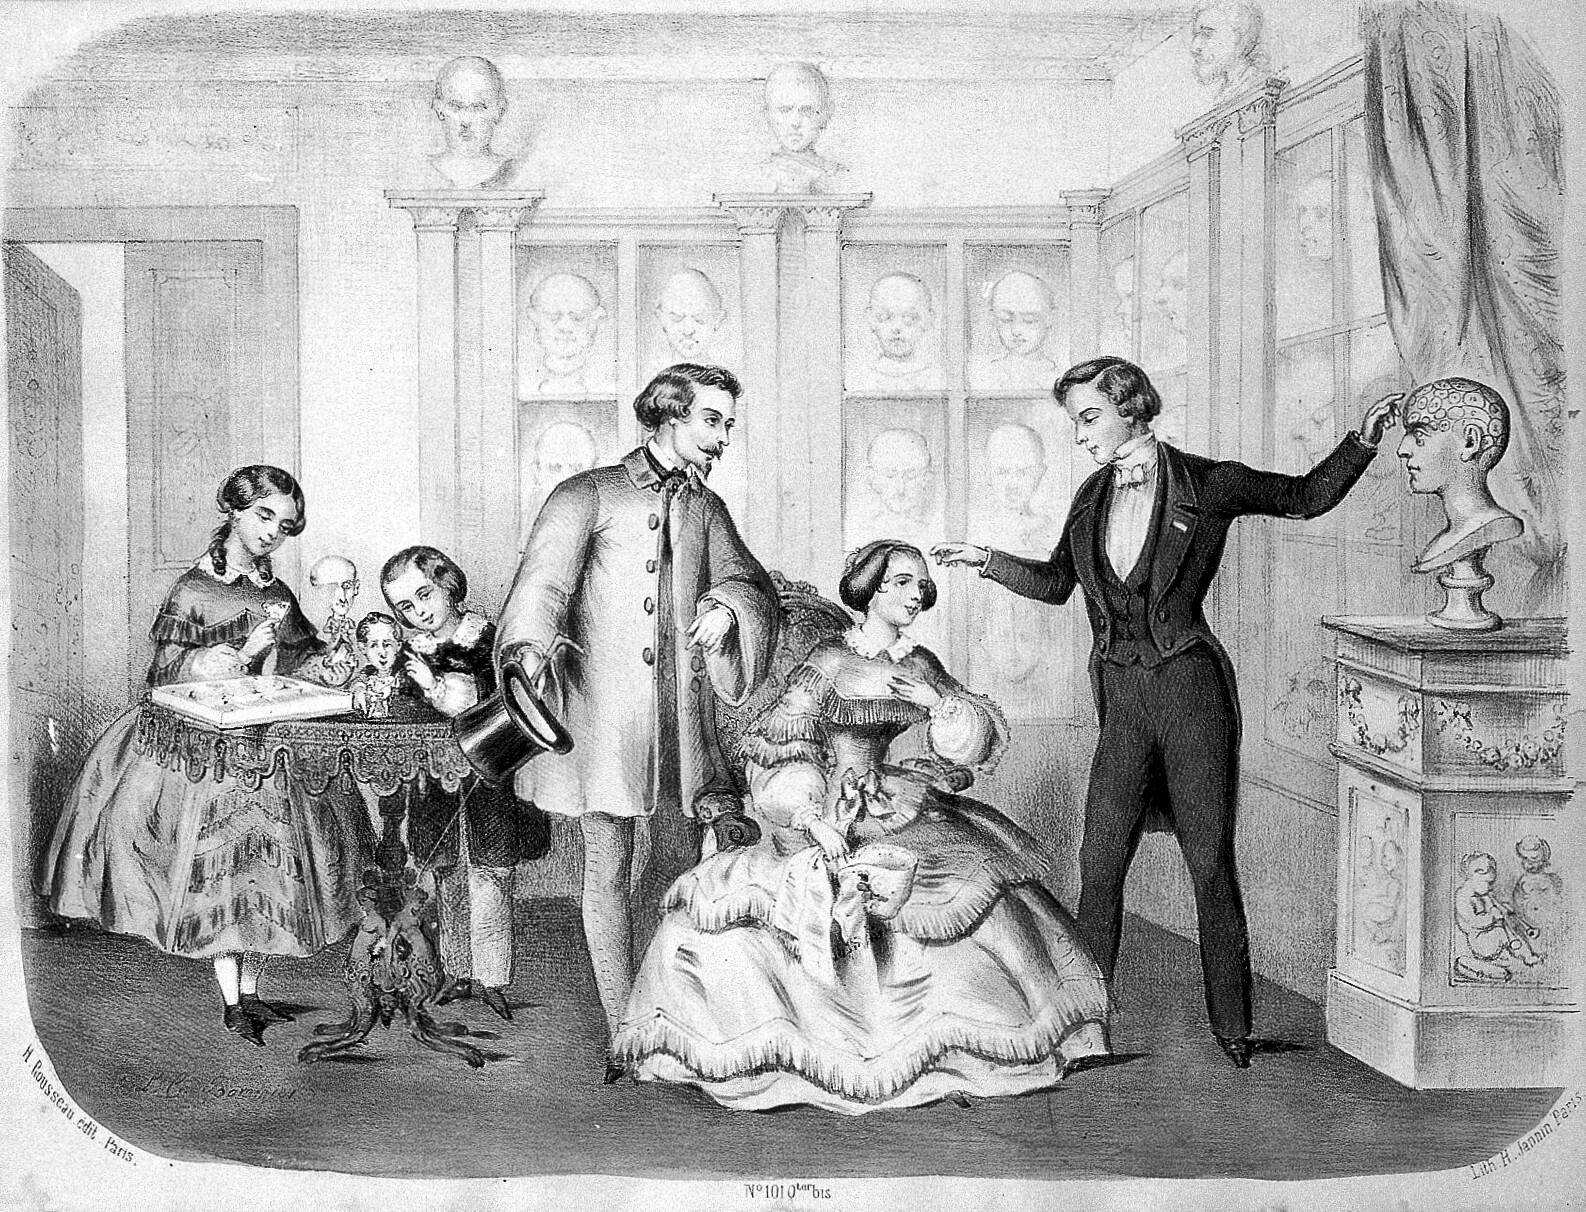 Lithograph depicting a phrenologist gesturing at a bust, while a man and woman observe. To the left, two girls examine dolls.